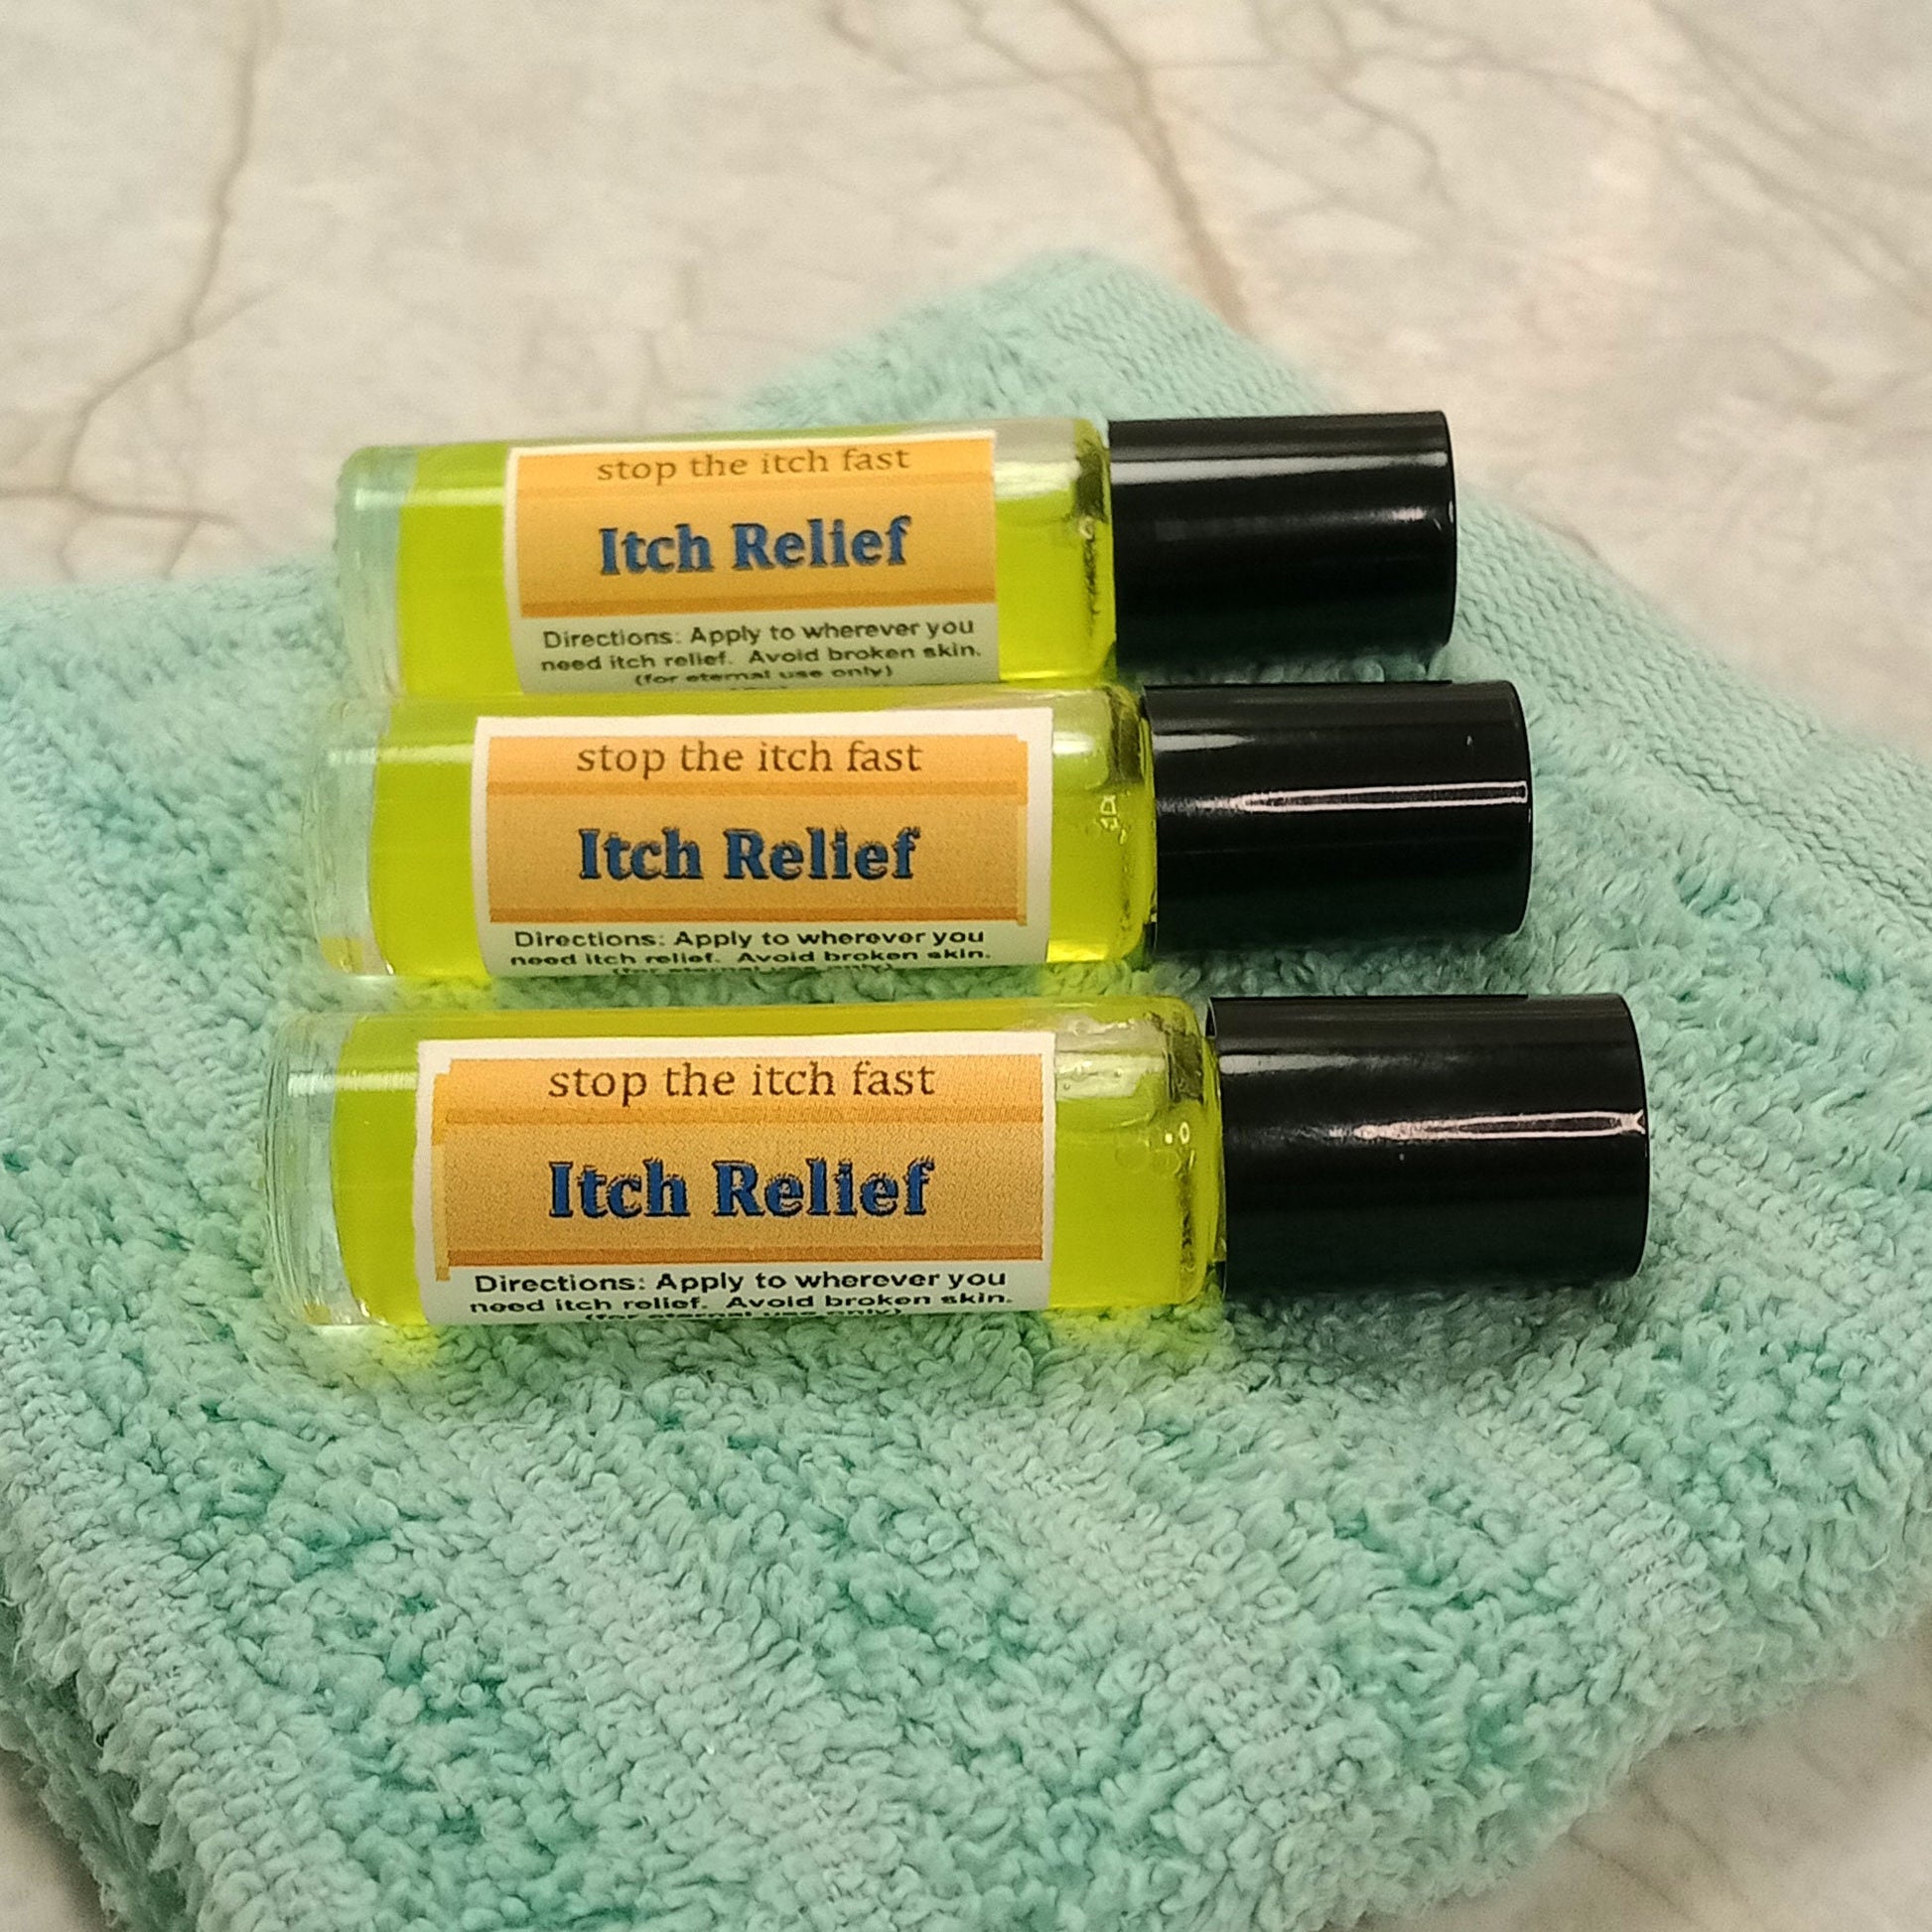 Itch Relief Roll-On Stick: Bug Bite, Bee Sting, Scrapes